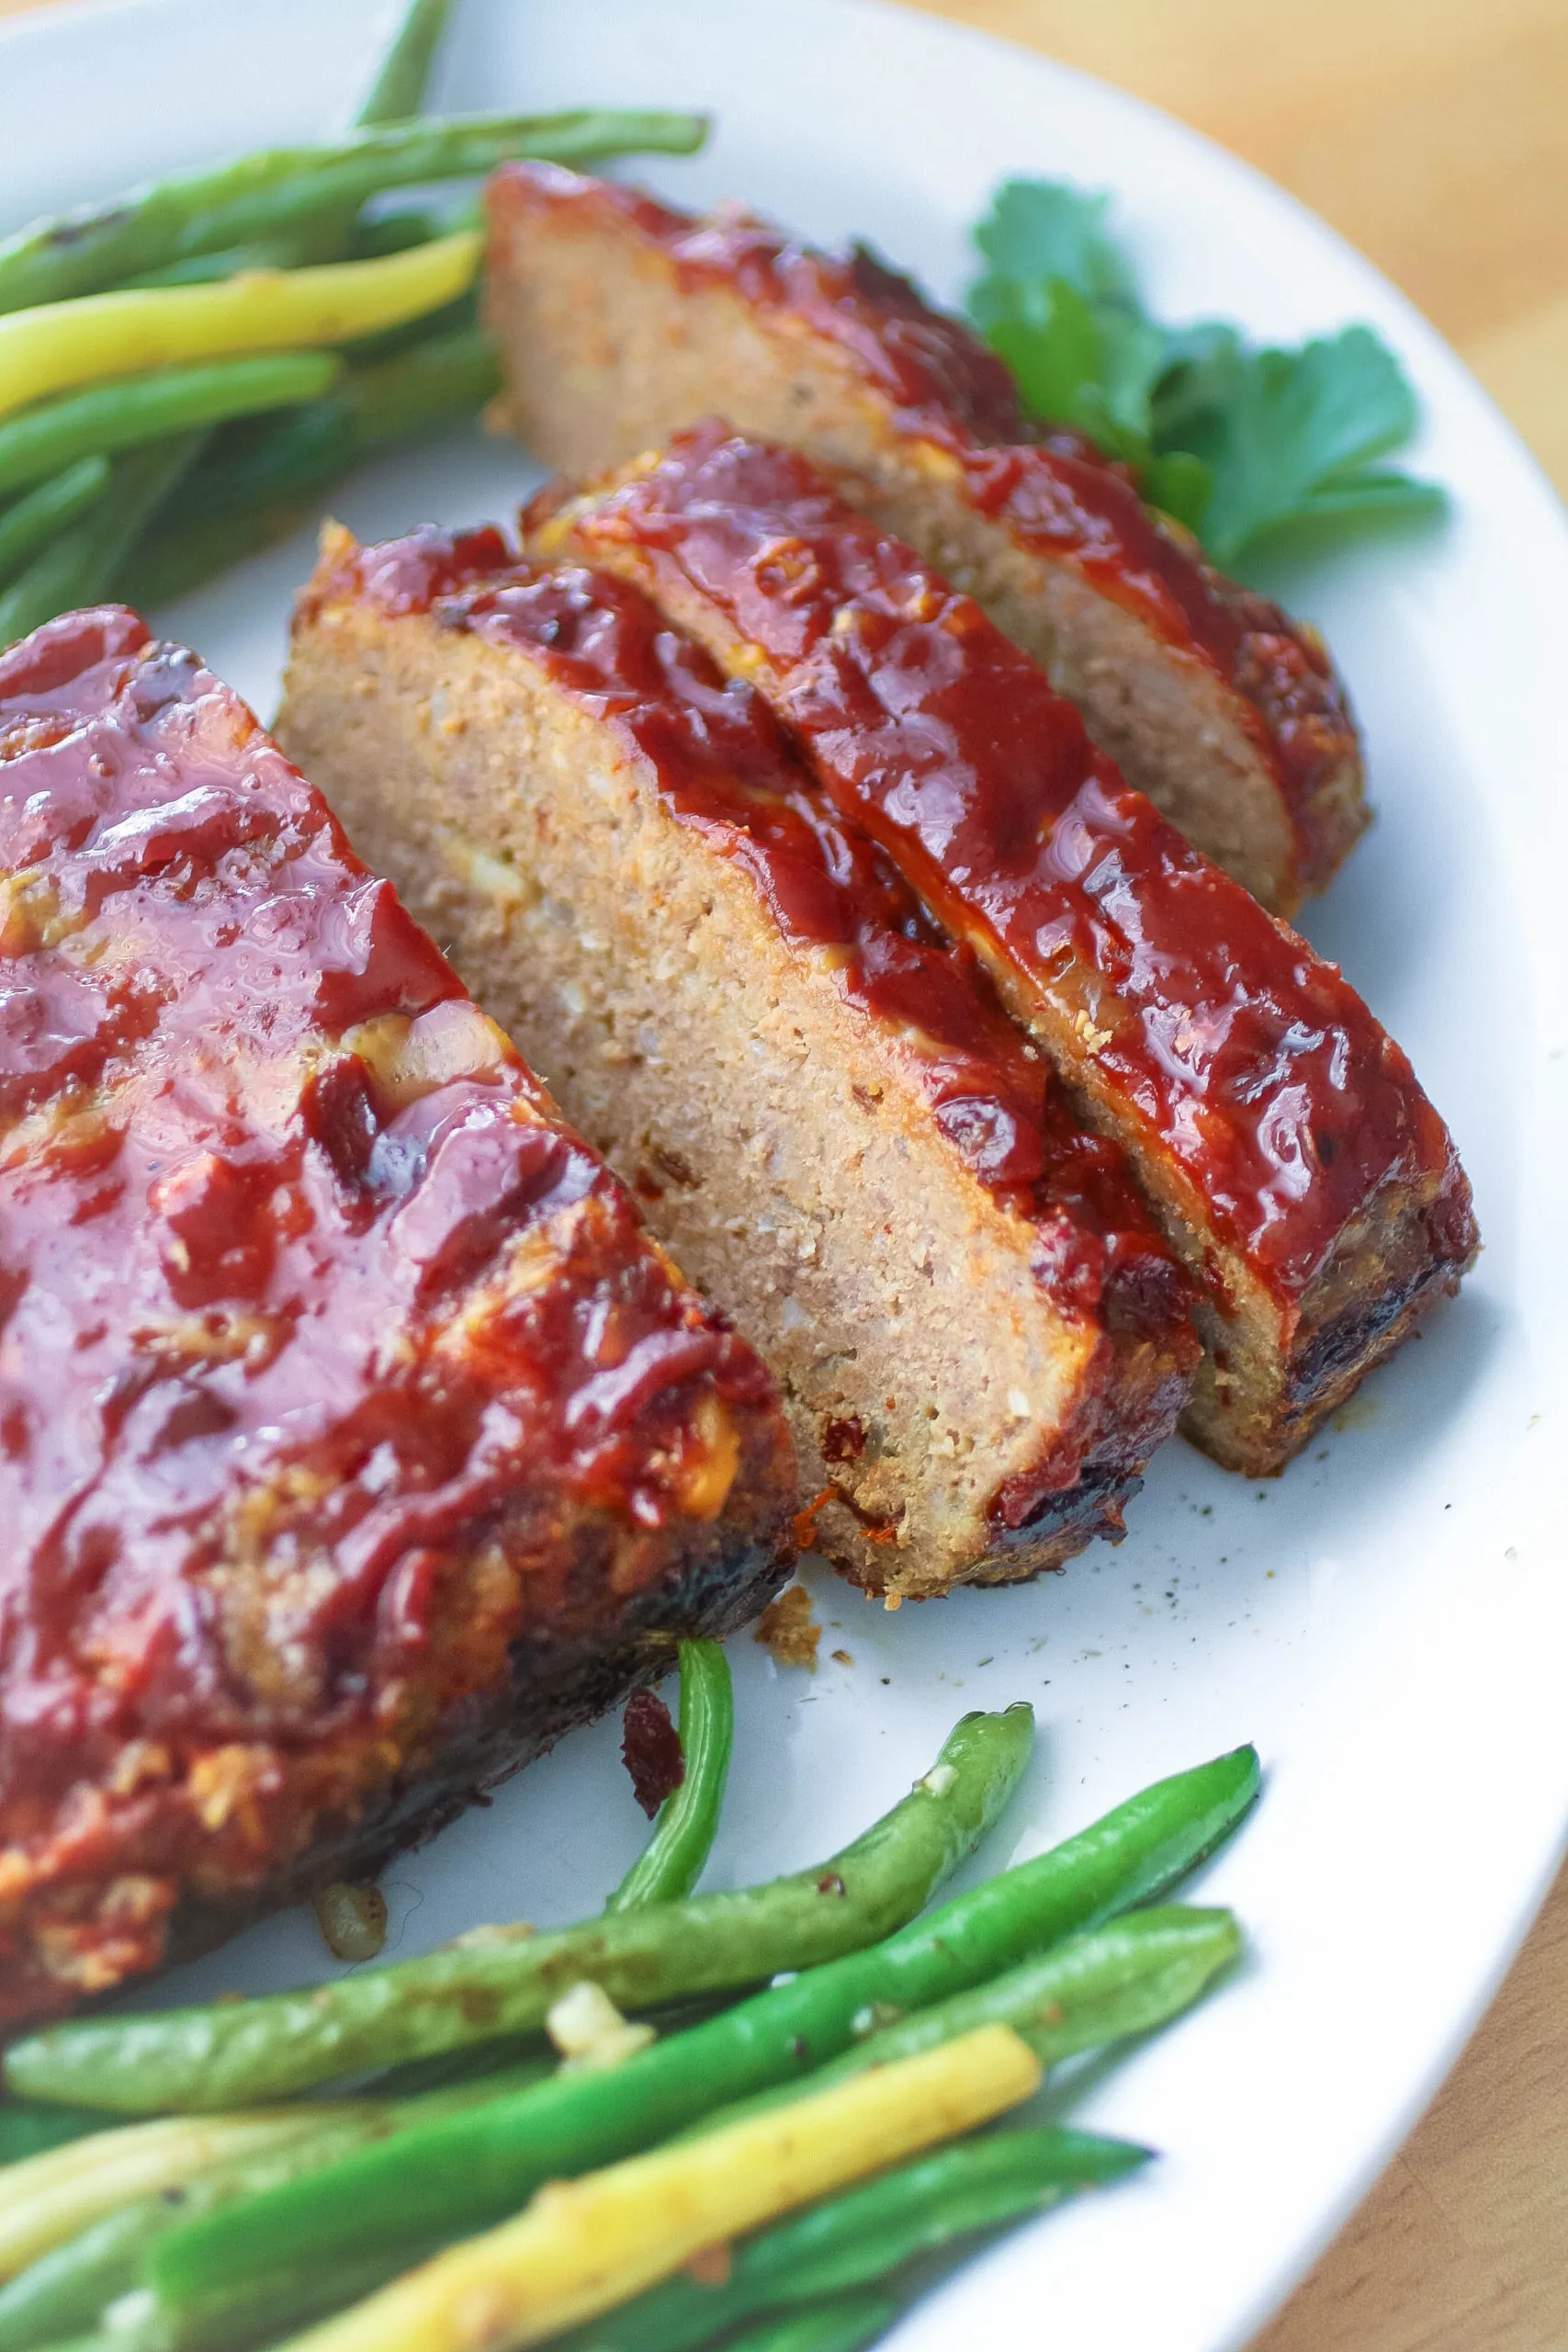 Slices of Spicy Chipotle Meatloaf on a platter.